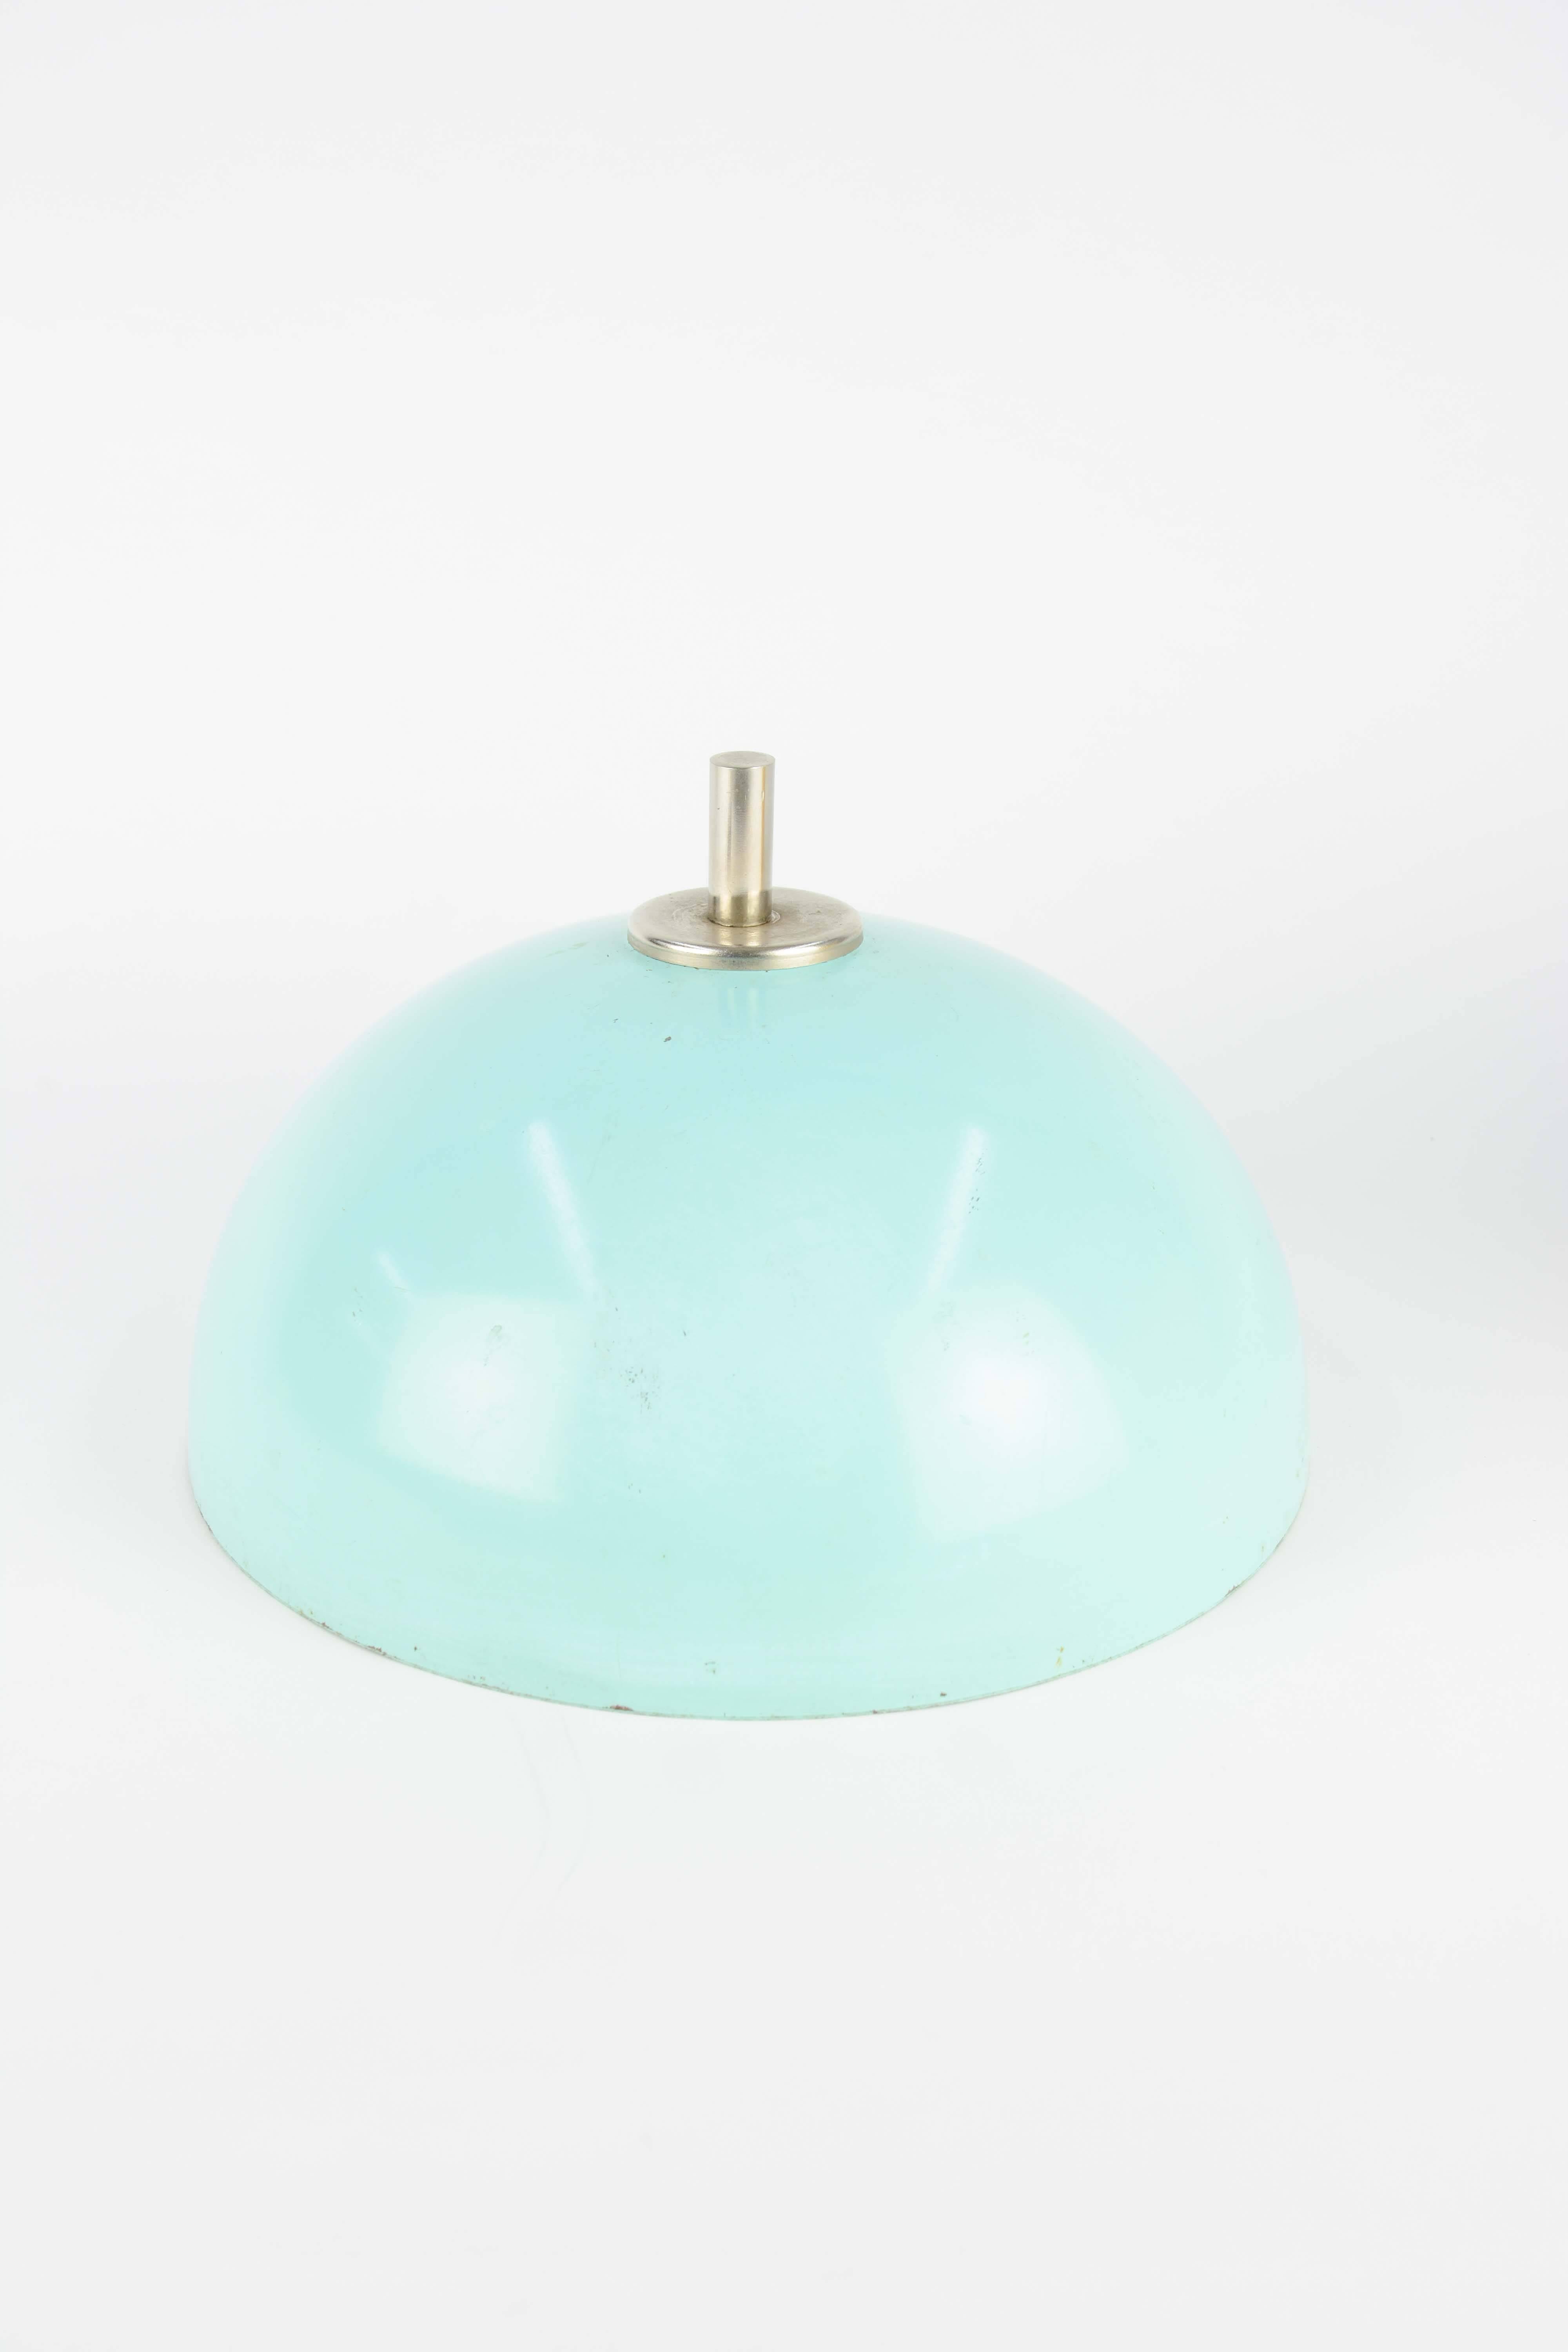 Mid-20th Century Stunning 1940s Aqua Blue French Desk Lamp with Faux Ivory Stem